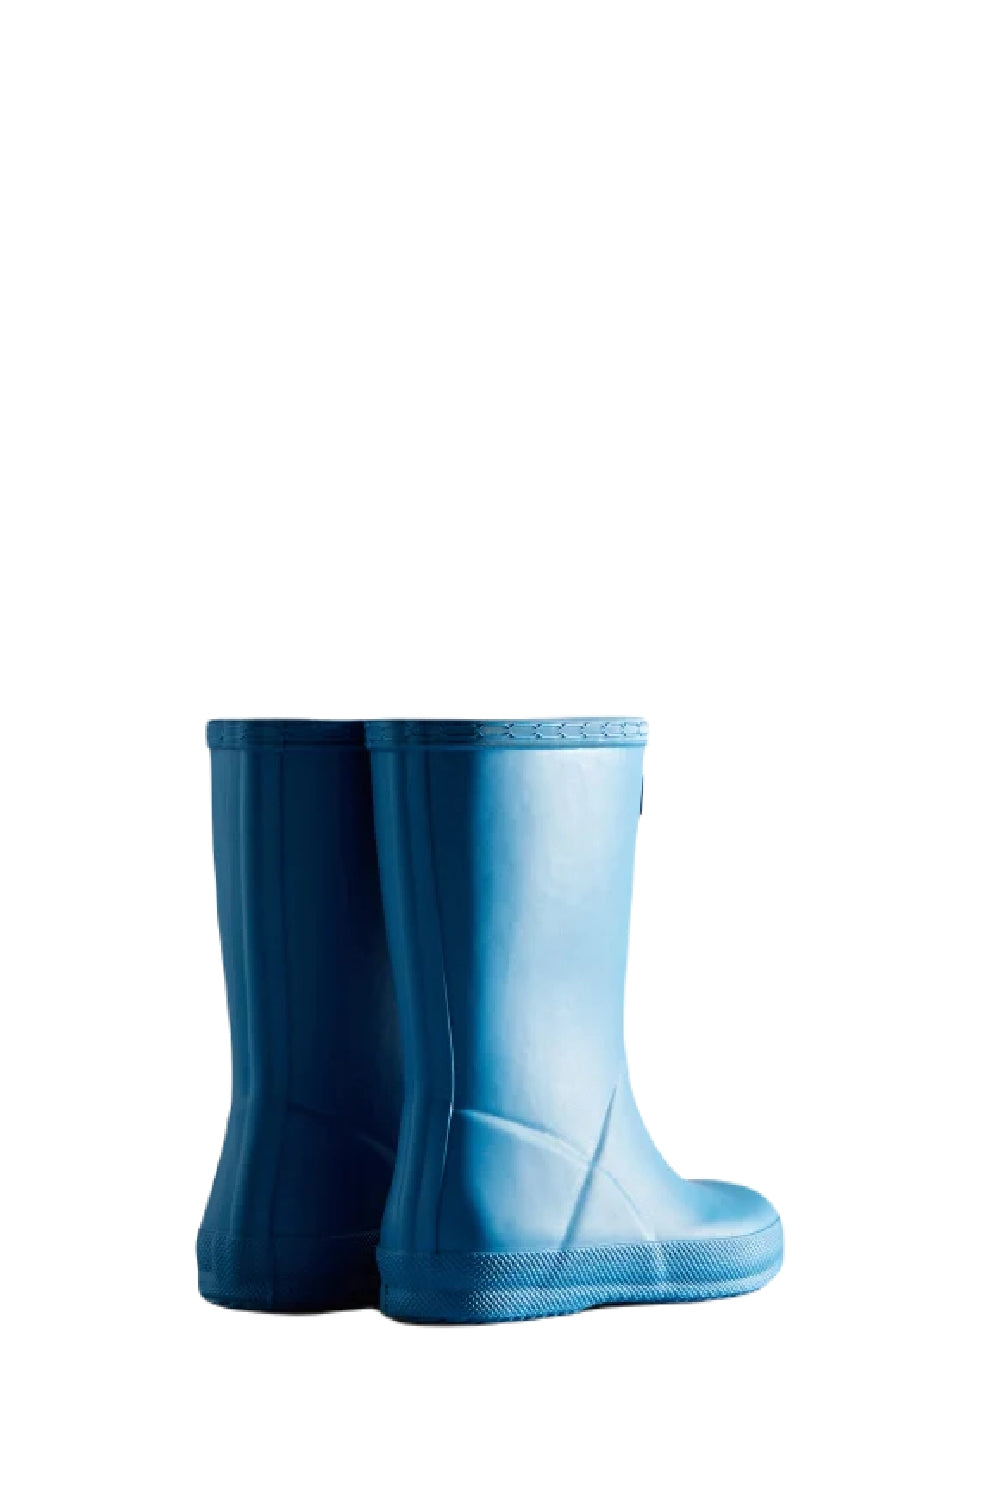 Hunter Kids First Classic Wellington Boots in Poolhouse Blue